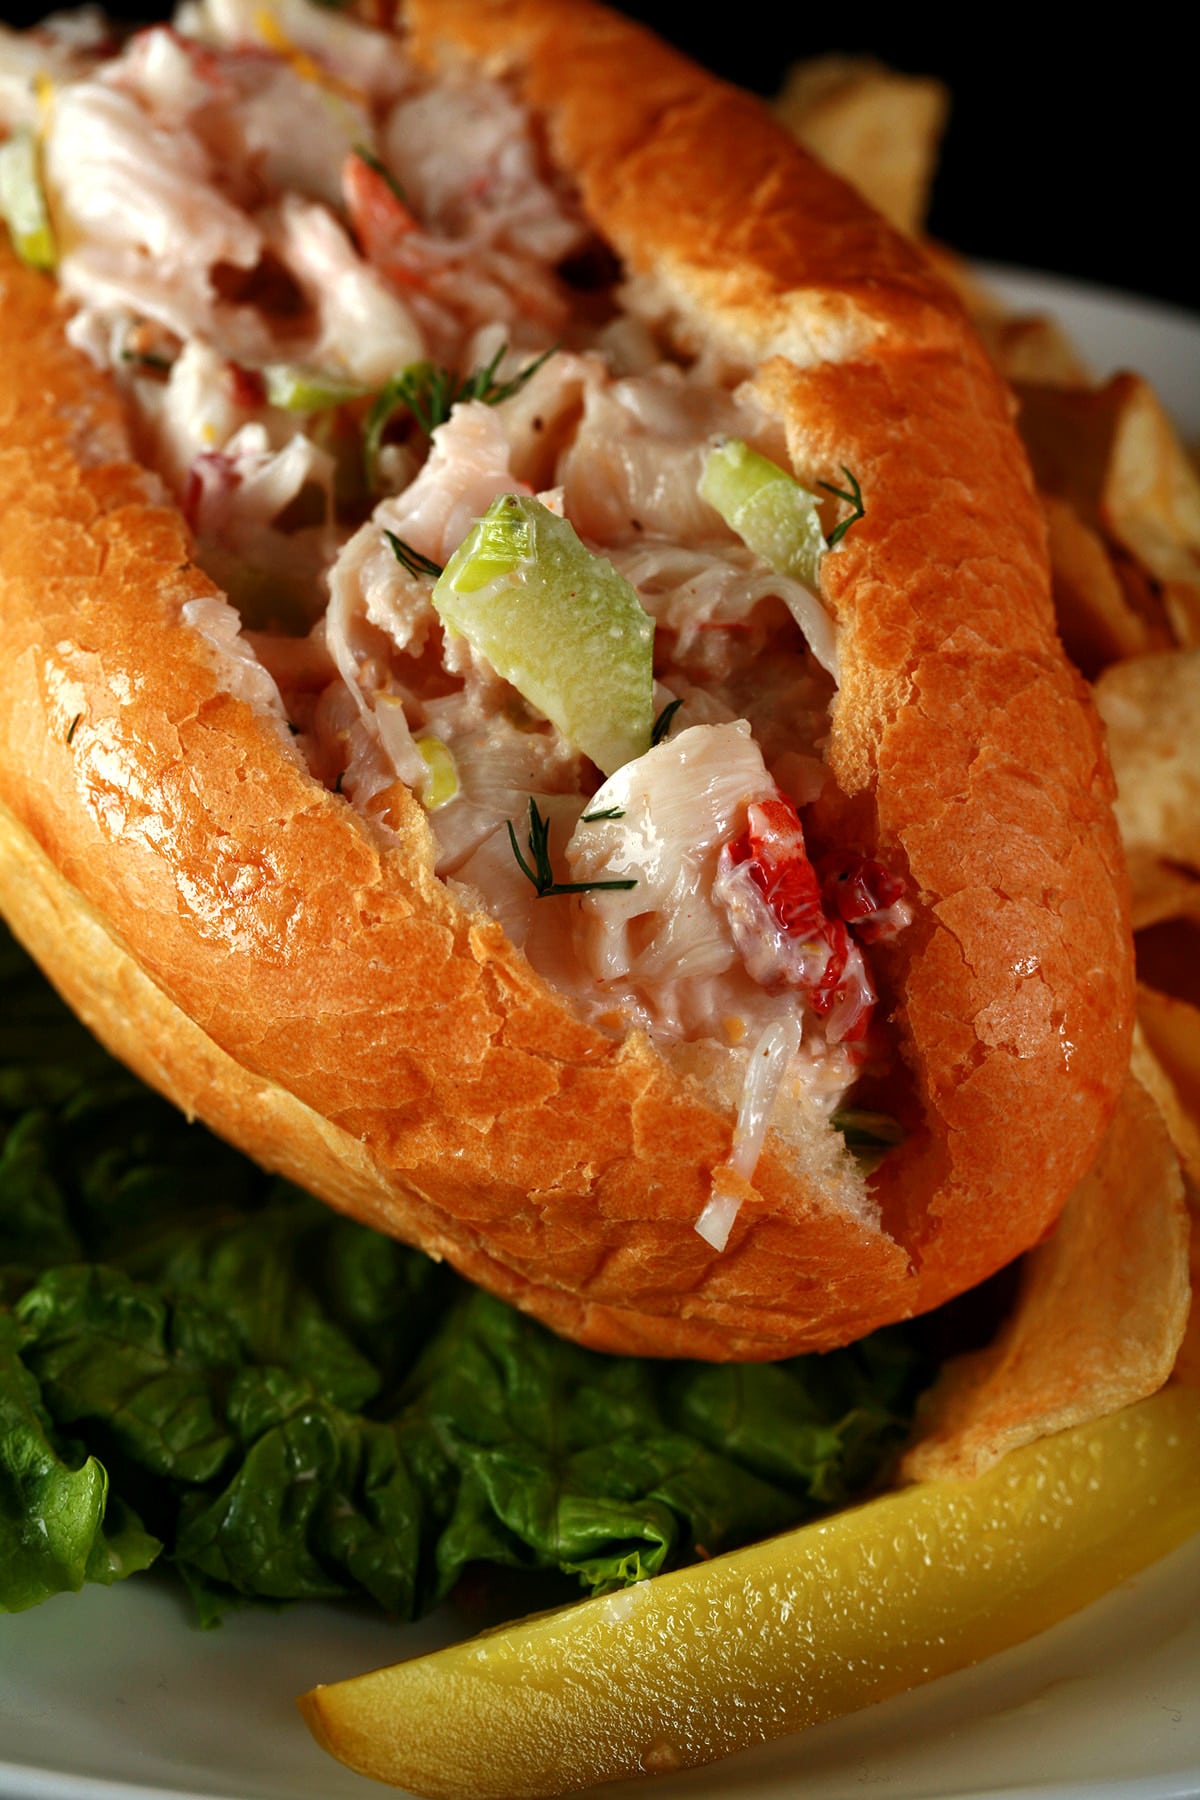 A Lobster Roll sandwich on a plate with chips and a pickle.